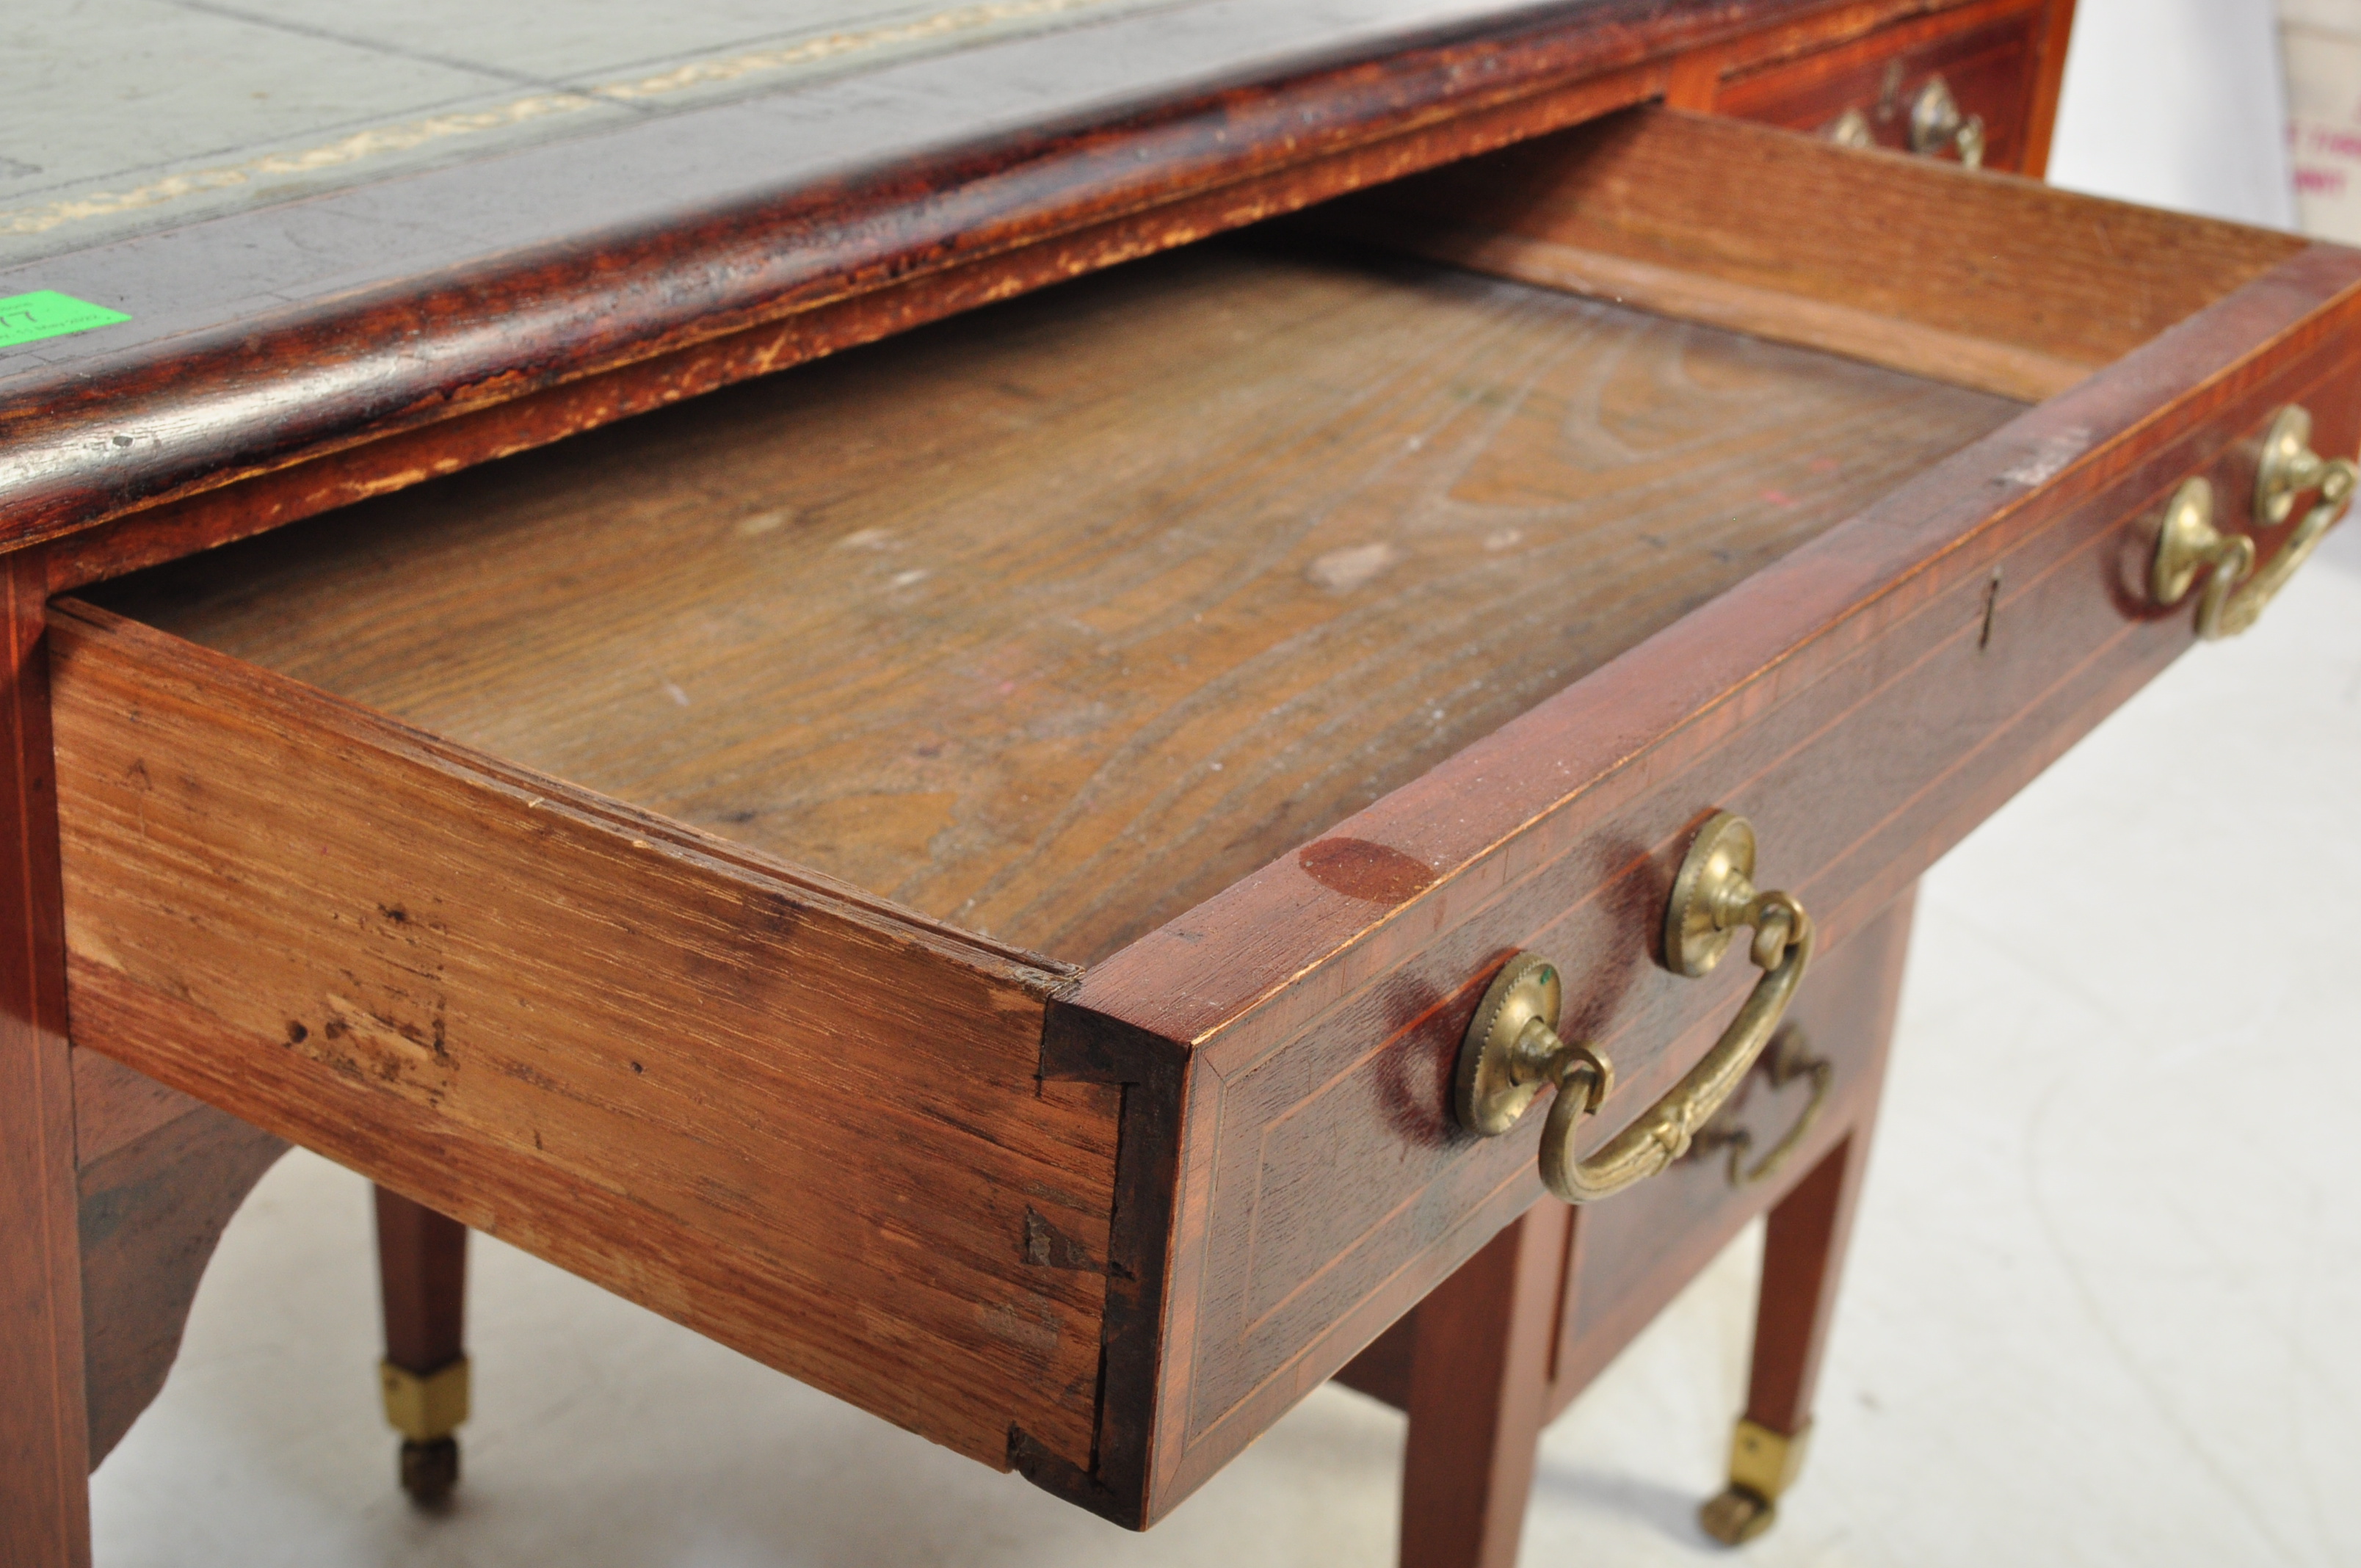 AN EDWARDIAN MAHOGANY LEATHER TOP WRITING DESK/TABLE - Image 4 of 7